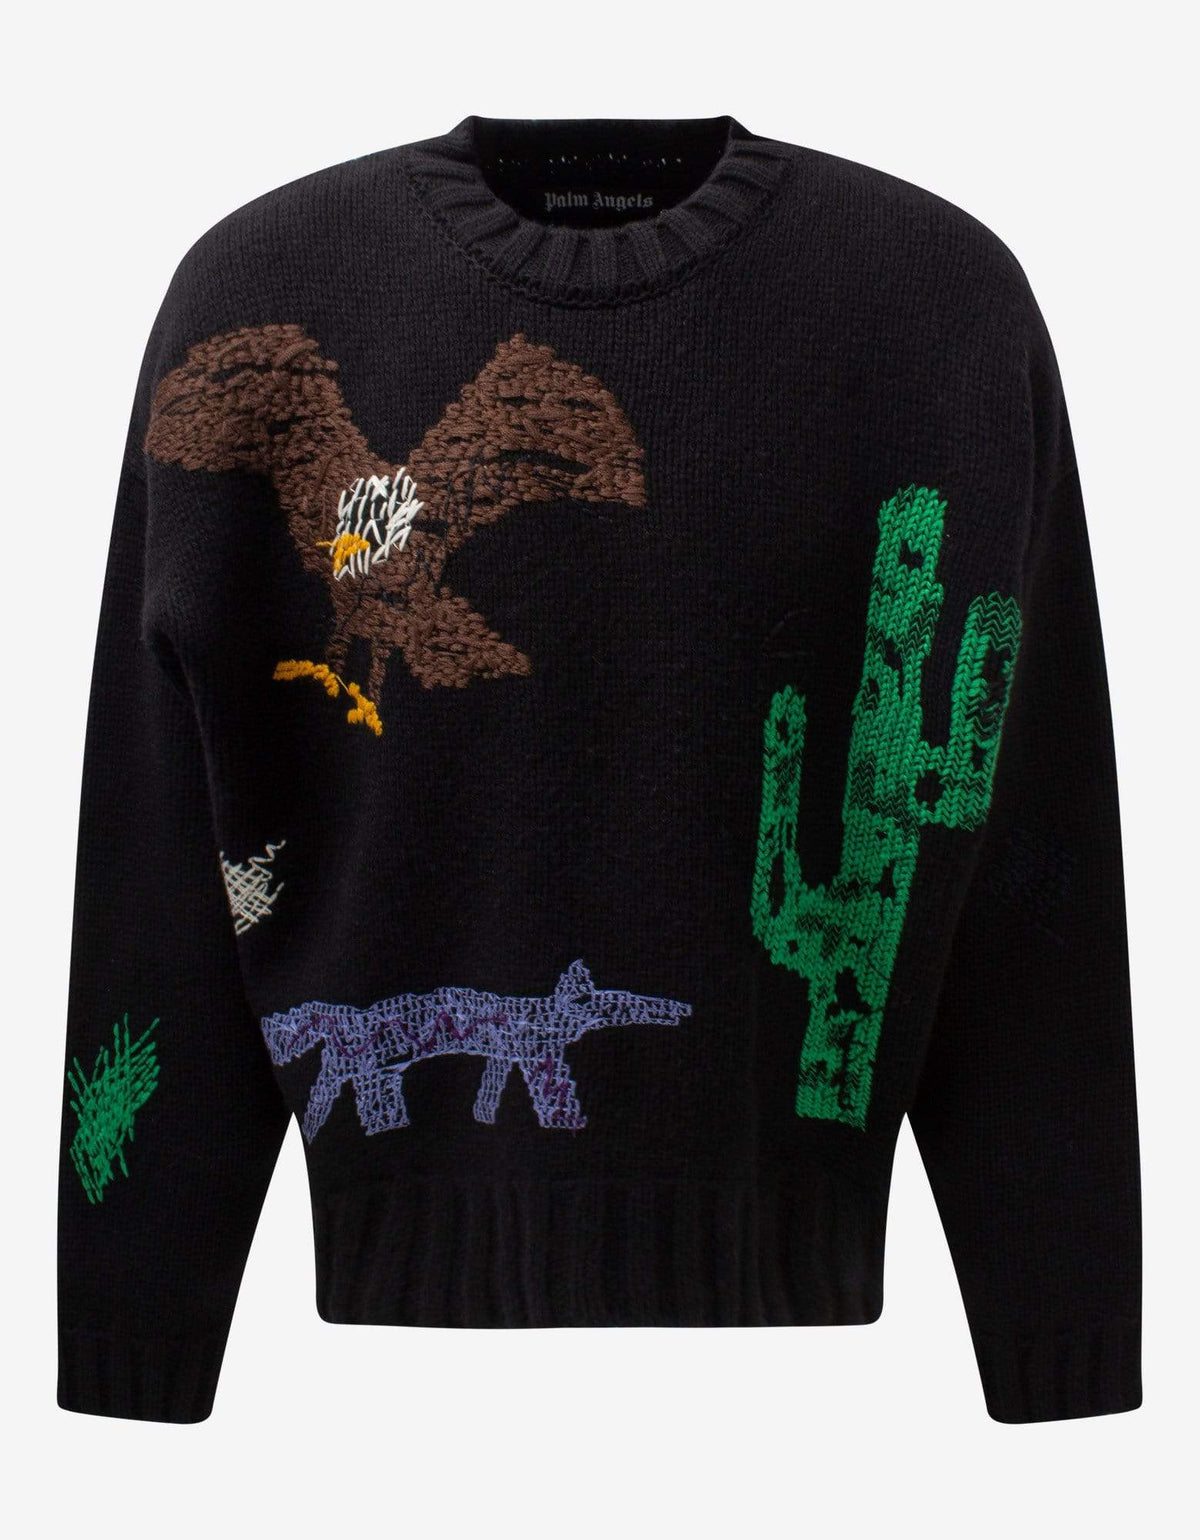 Palm Angels Black New Folk Embroidered Sweater